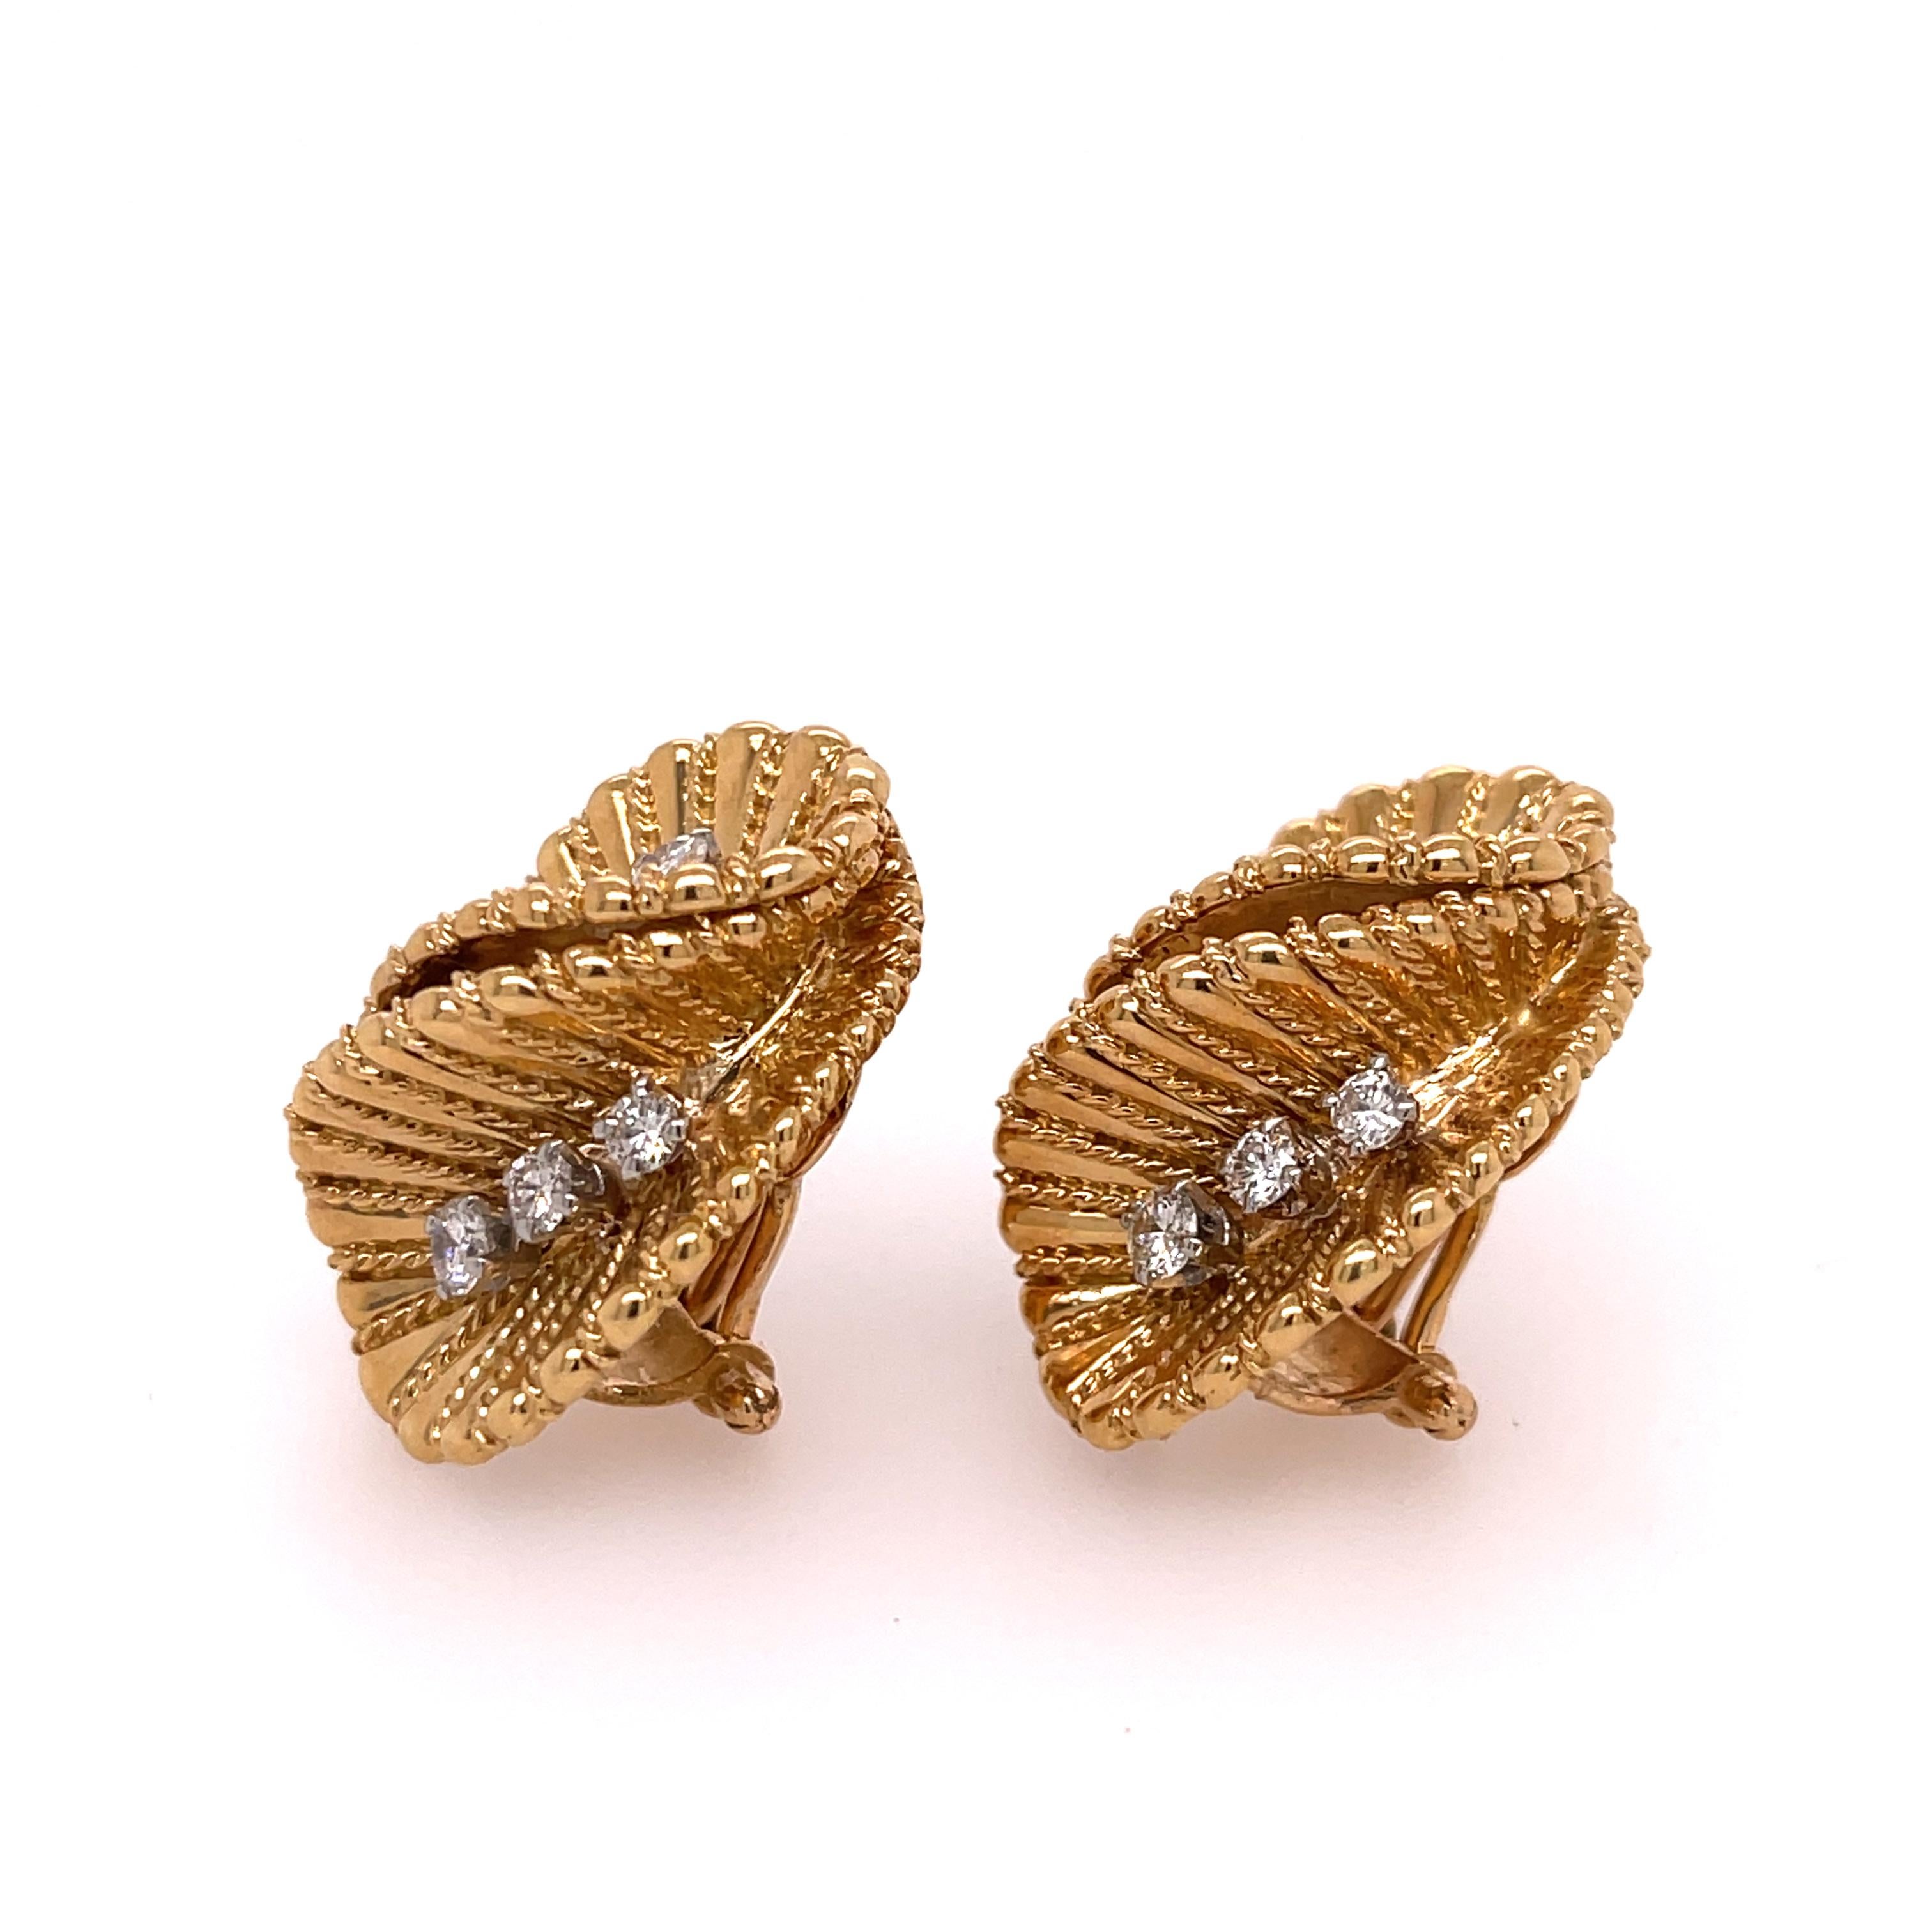 Ruffled leaf clip-on earrings accented with six brilliant cut round diamonds on each earring. The earrings are made in  18K yellow gold.